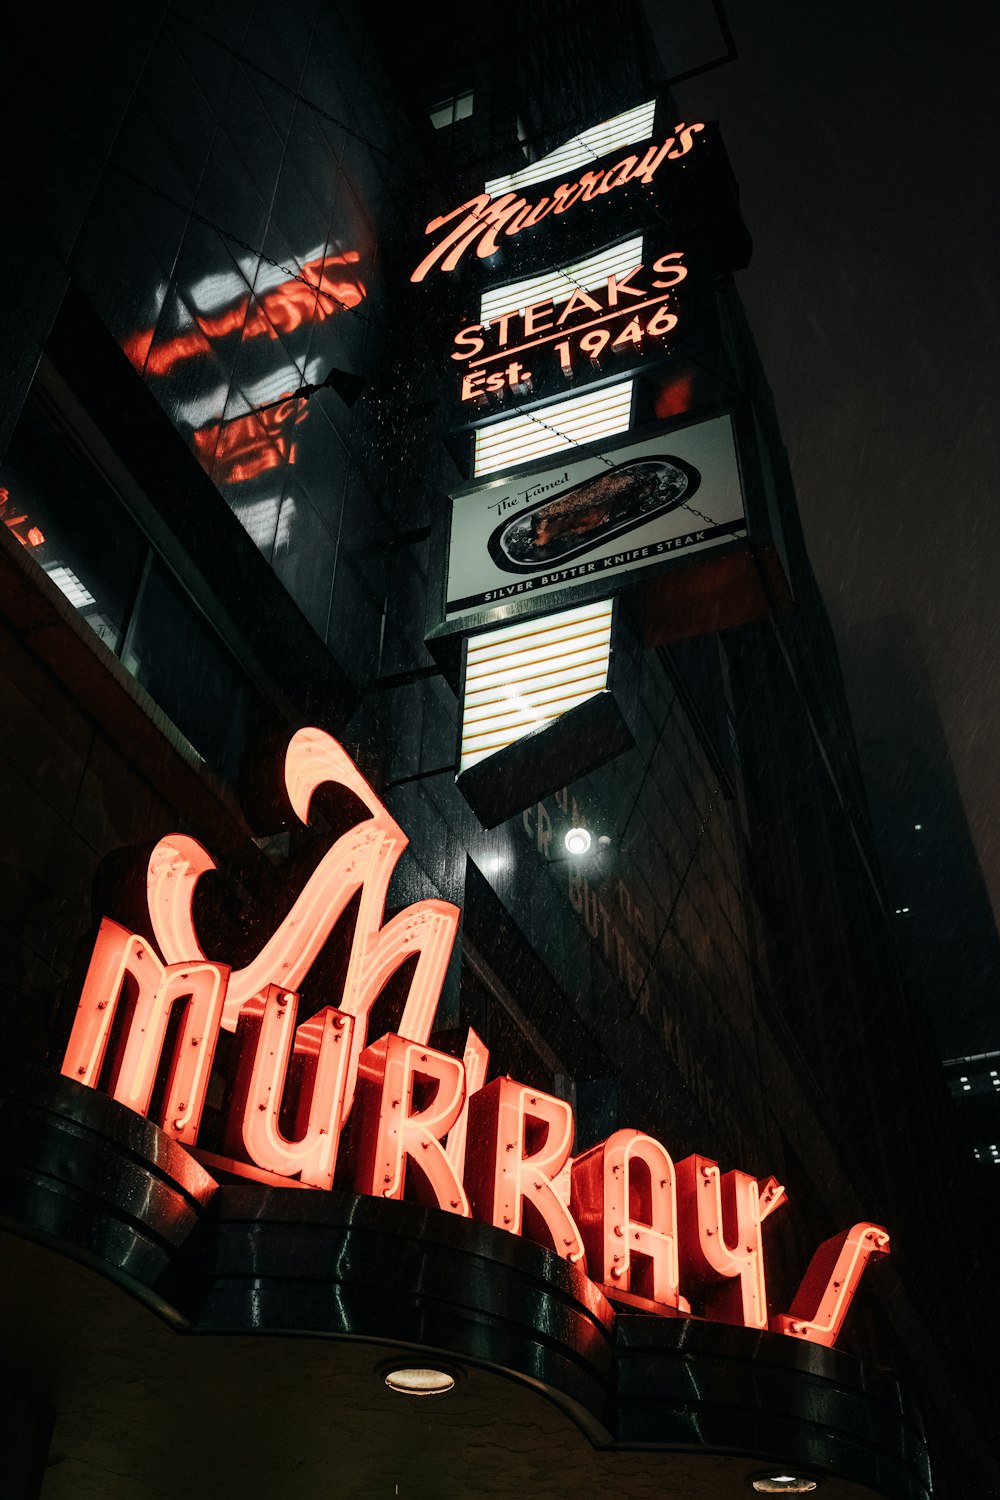 a neon sign for a restaurant on the side of a building